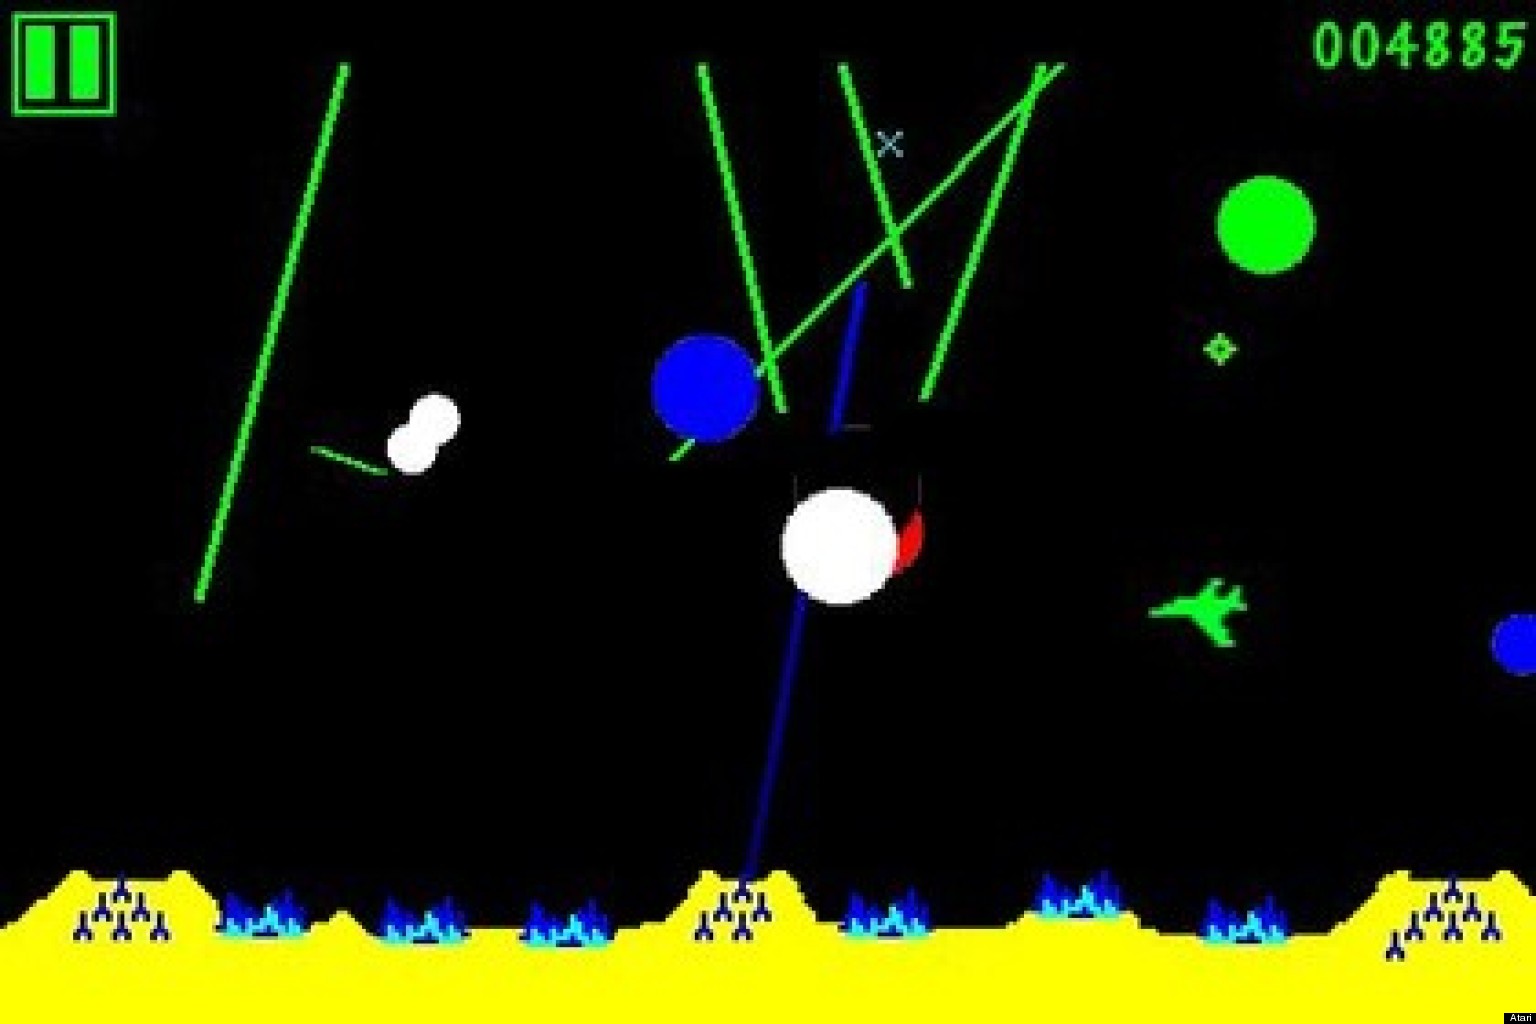 Missile Command [1982 Video Game]